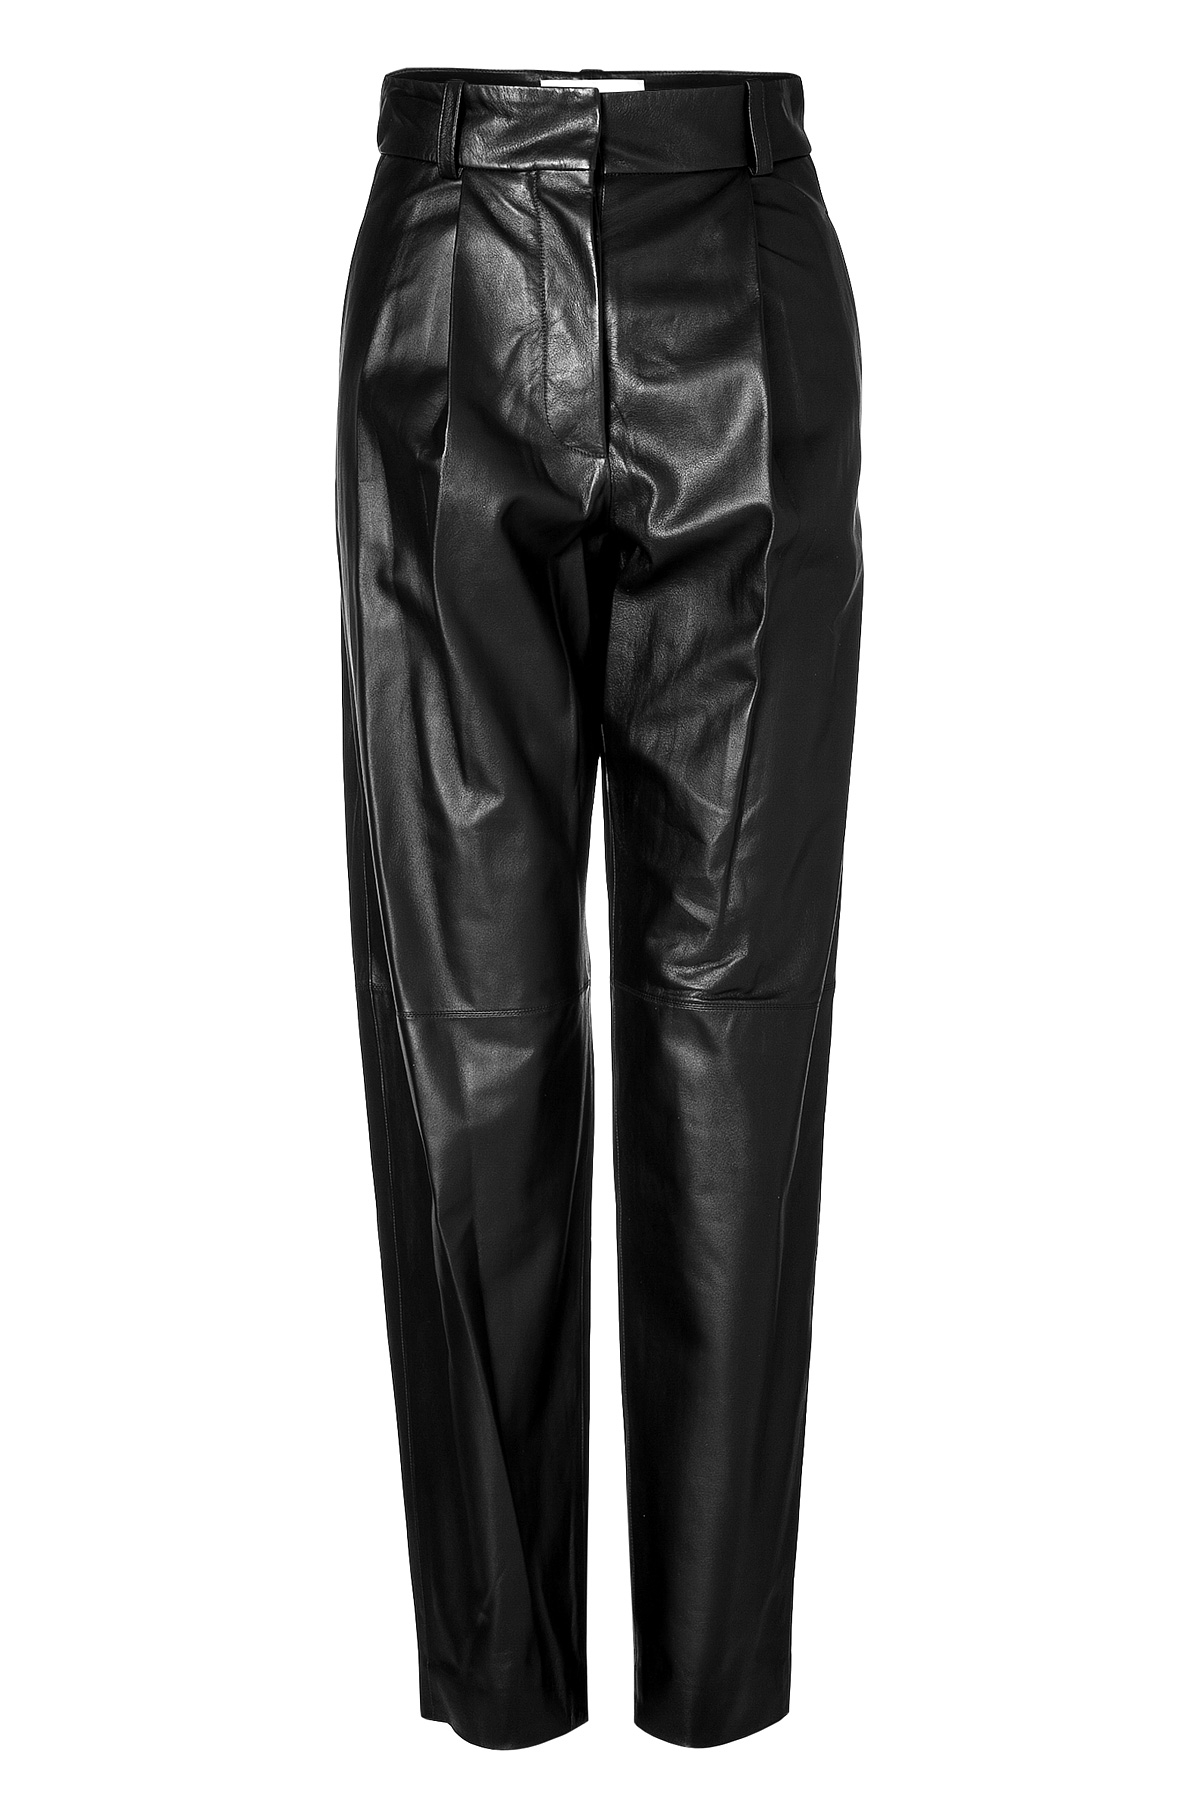 Lyst - Vionnet Leather Pleated Front Pants - Black in Black